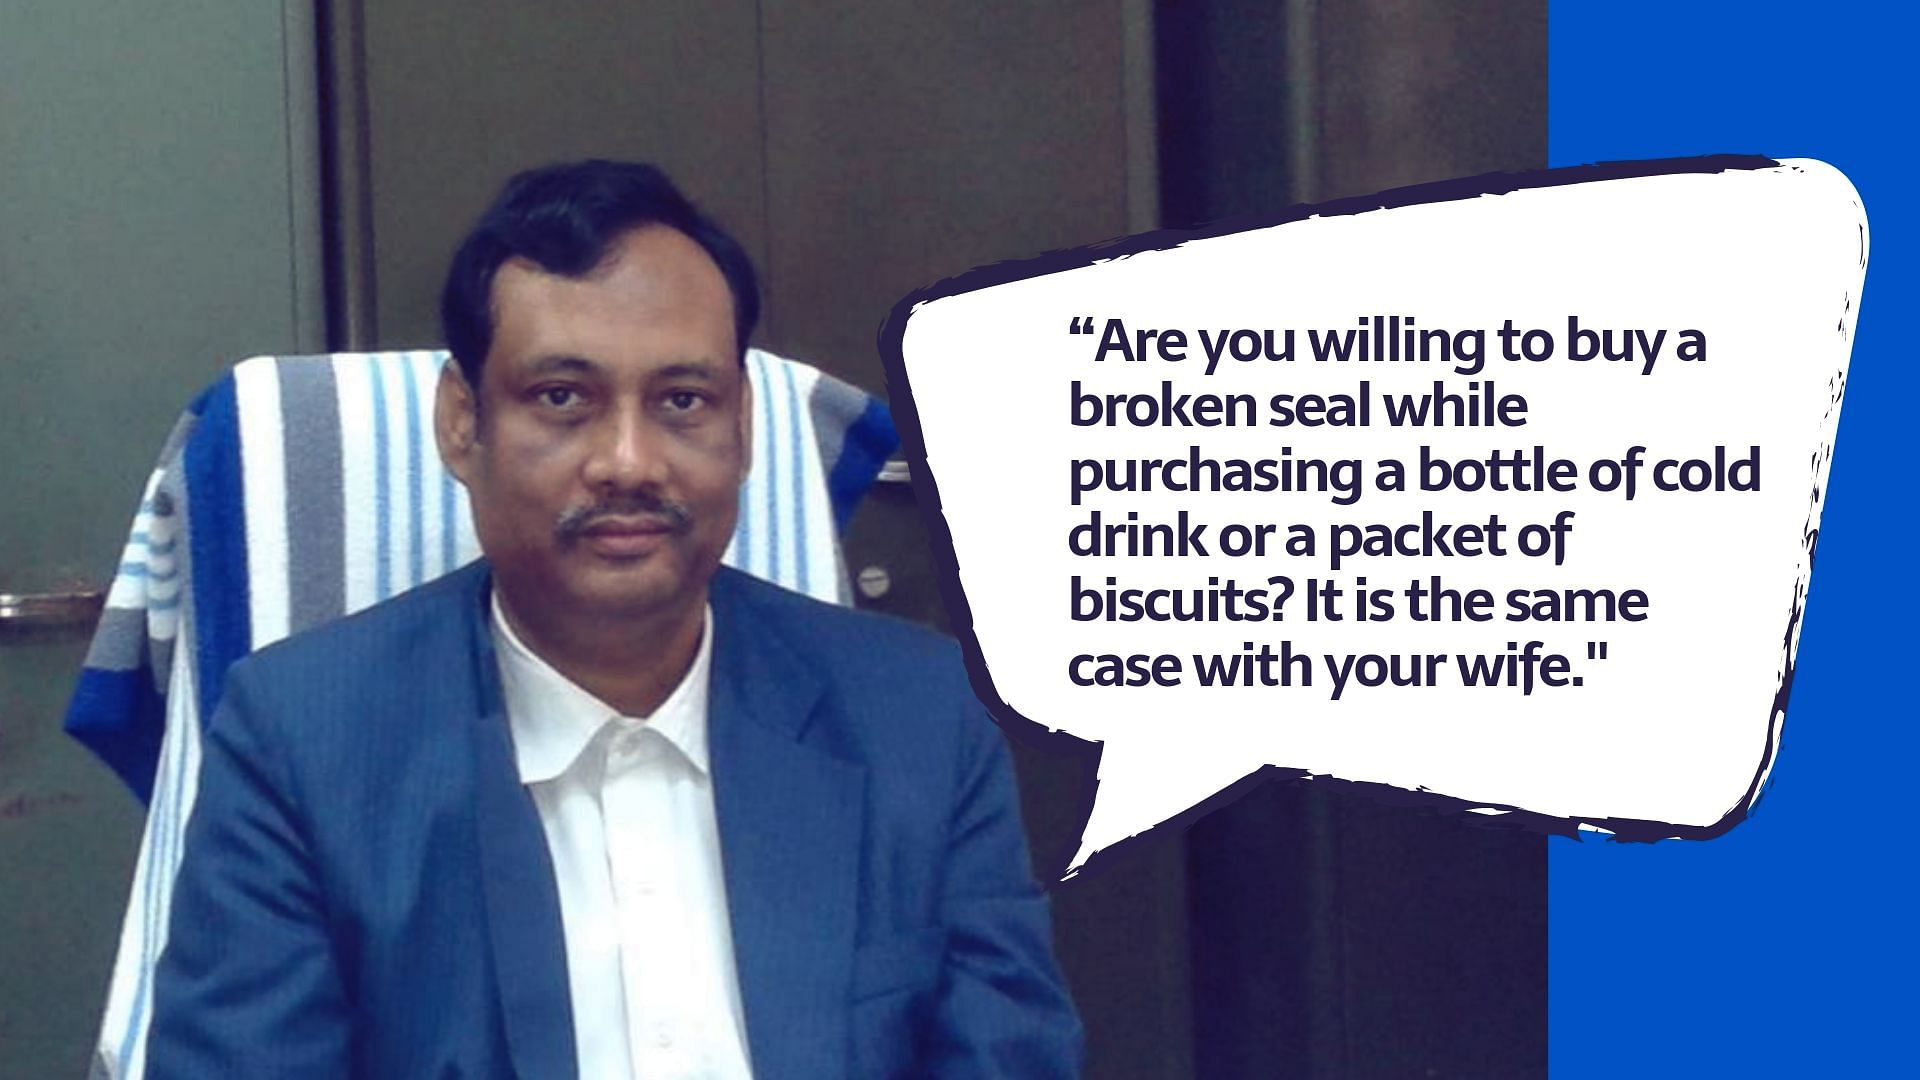 Kanak Sarkar, a Jadavpur University professor, has received massive backlash for a Facebook post comparing the virginity of a woman with the seal of a “cold drink bottle or a packet of biscuits.”